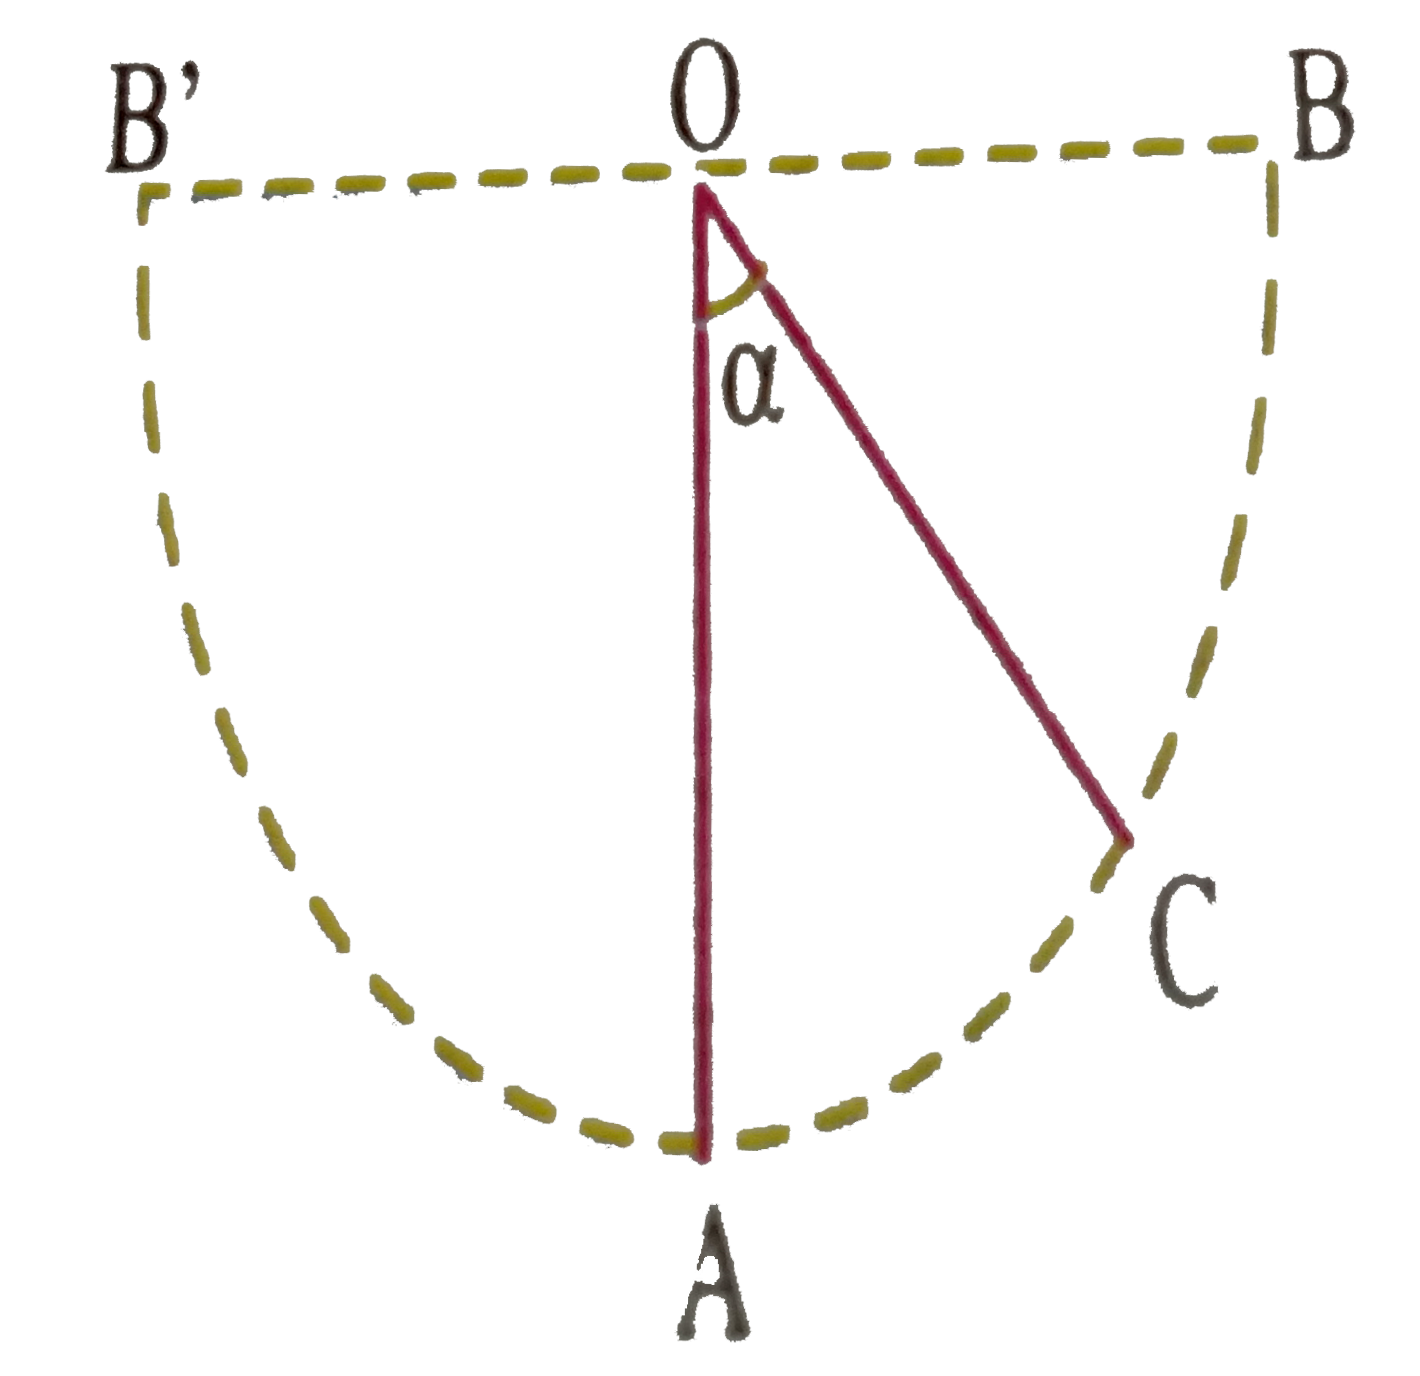 A bob of mas M is suspended by a massless  string of length L. The horizontal velocity v at position A  is just sufficient to make it  reach the point B. The angle theta at which the speed of the bob is half of that at A, satisfies.   .